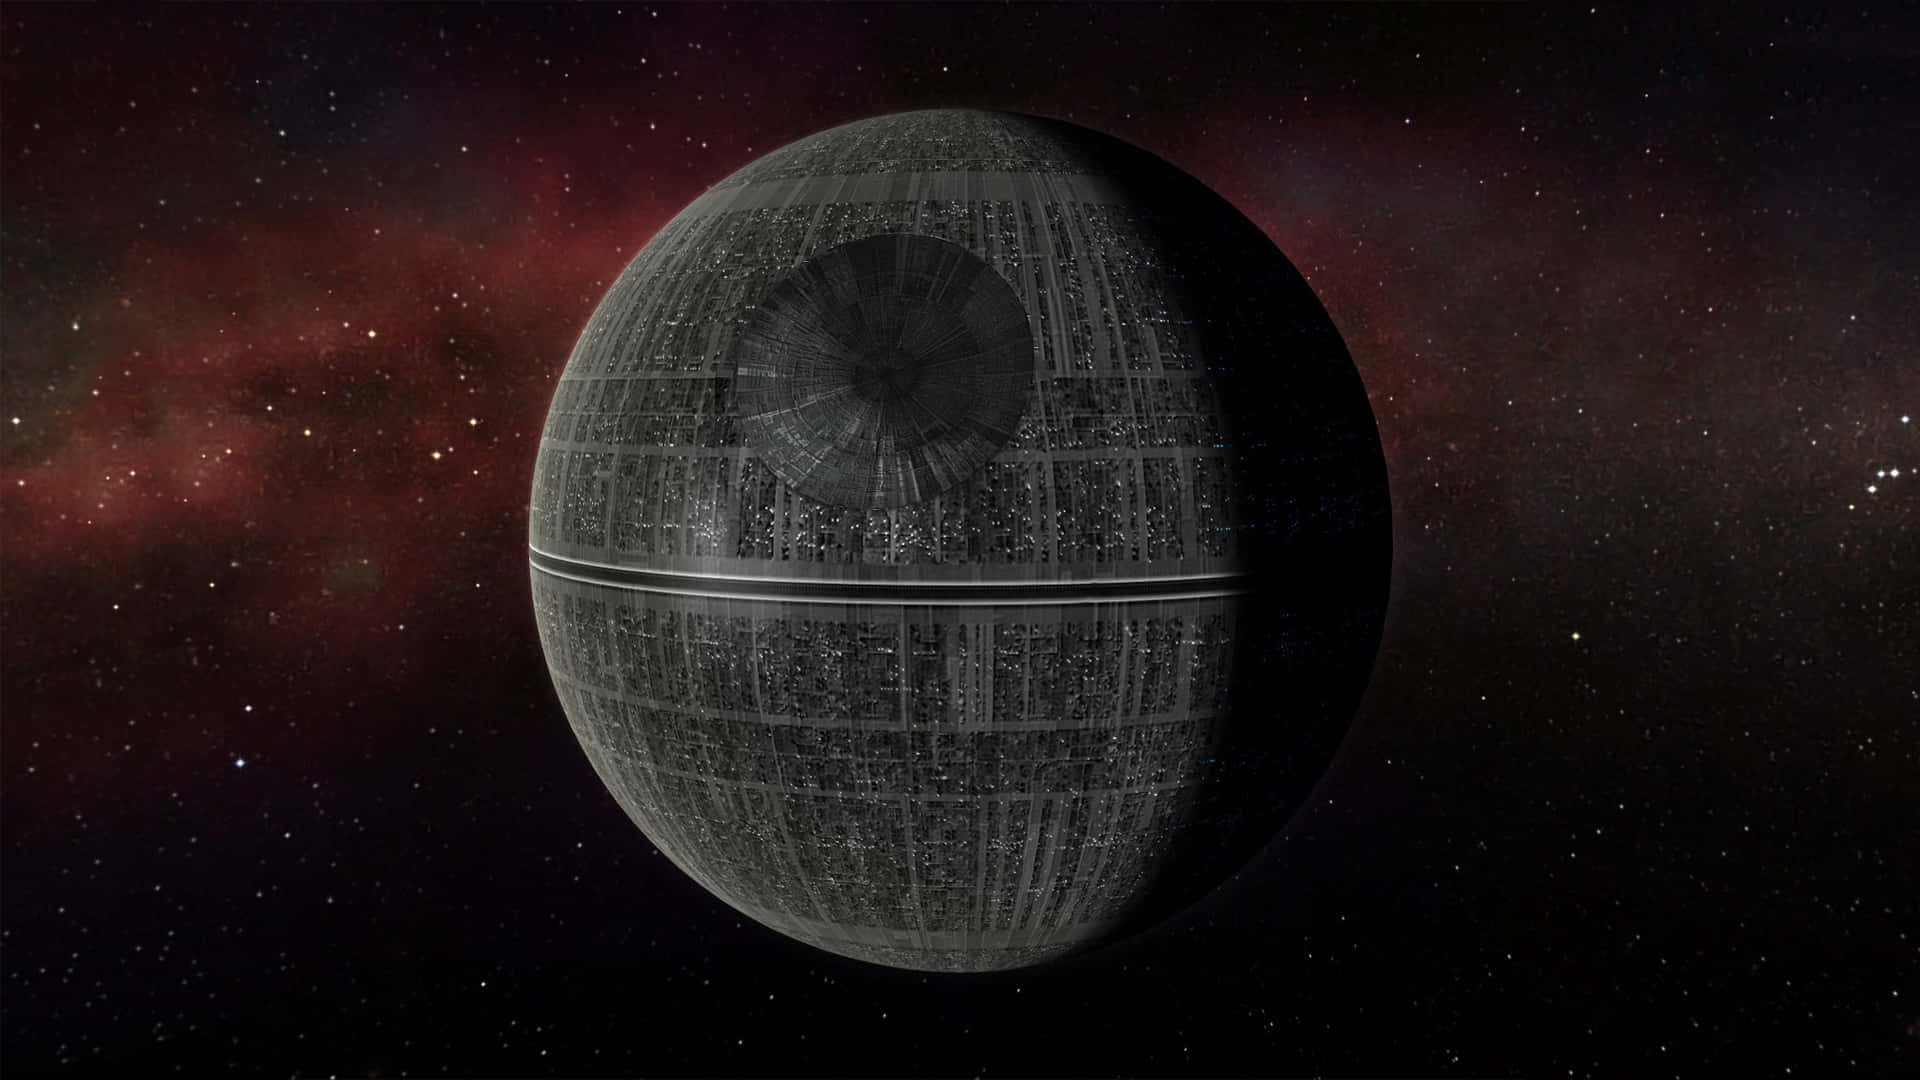 Death Star plunging through the cosmos.